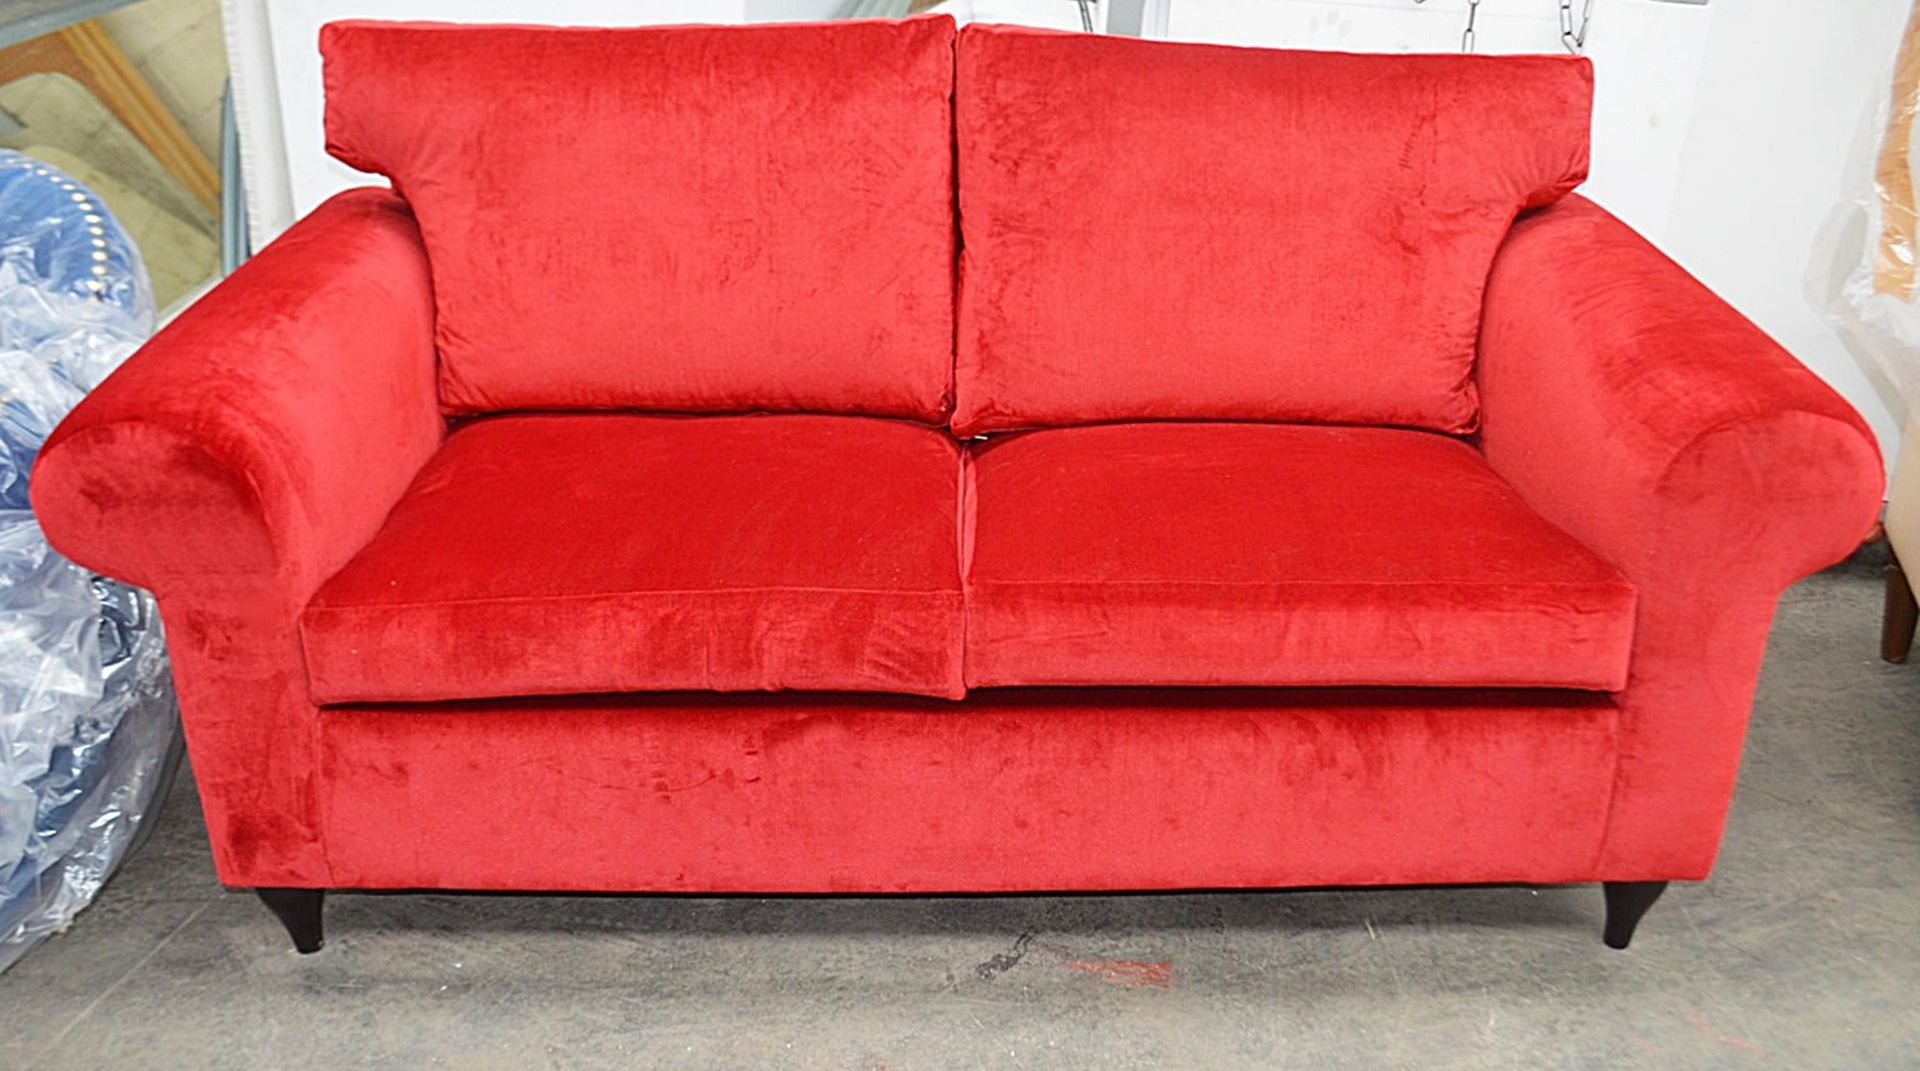 1 x Bespoke 2-Seater Commercial Sofa In A Bright Red Velvet With Complimenting Cushion - - Image 2 of 6